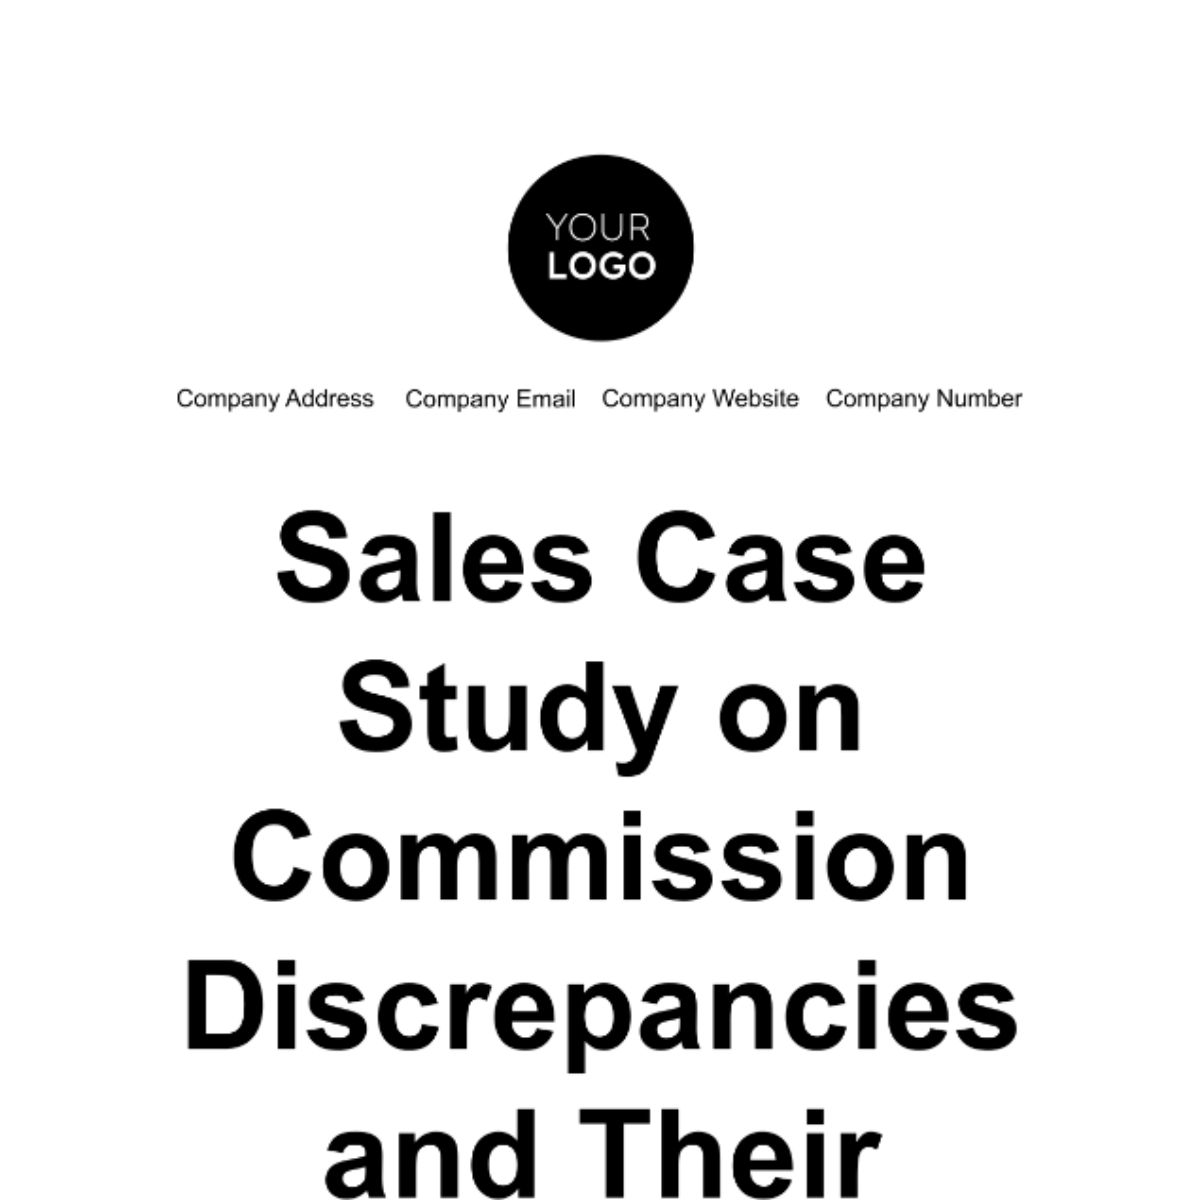 Free Sales Case Study on Commission Discrepancies and Their Resolutions Template